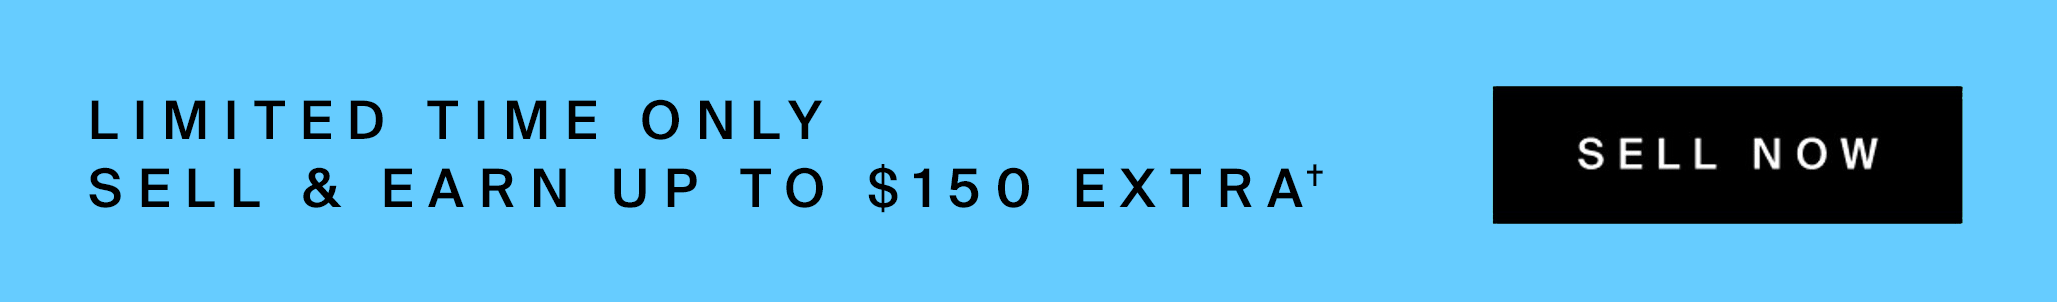 This month only: Sell & earn up to $150 extra**